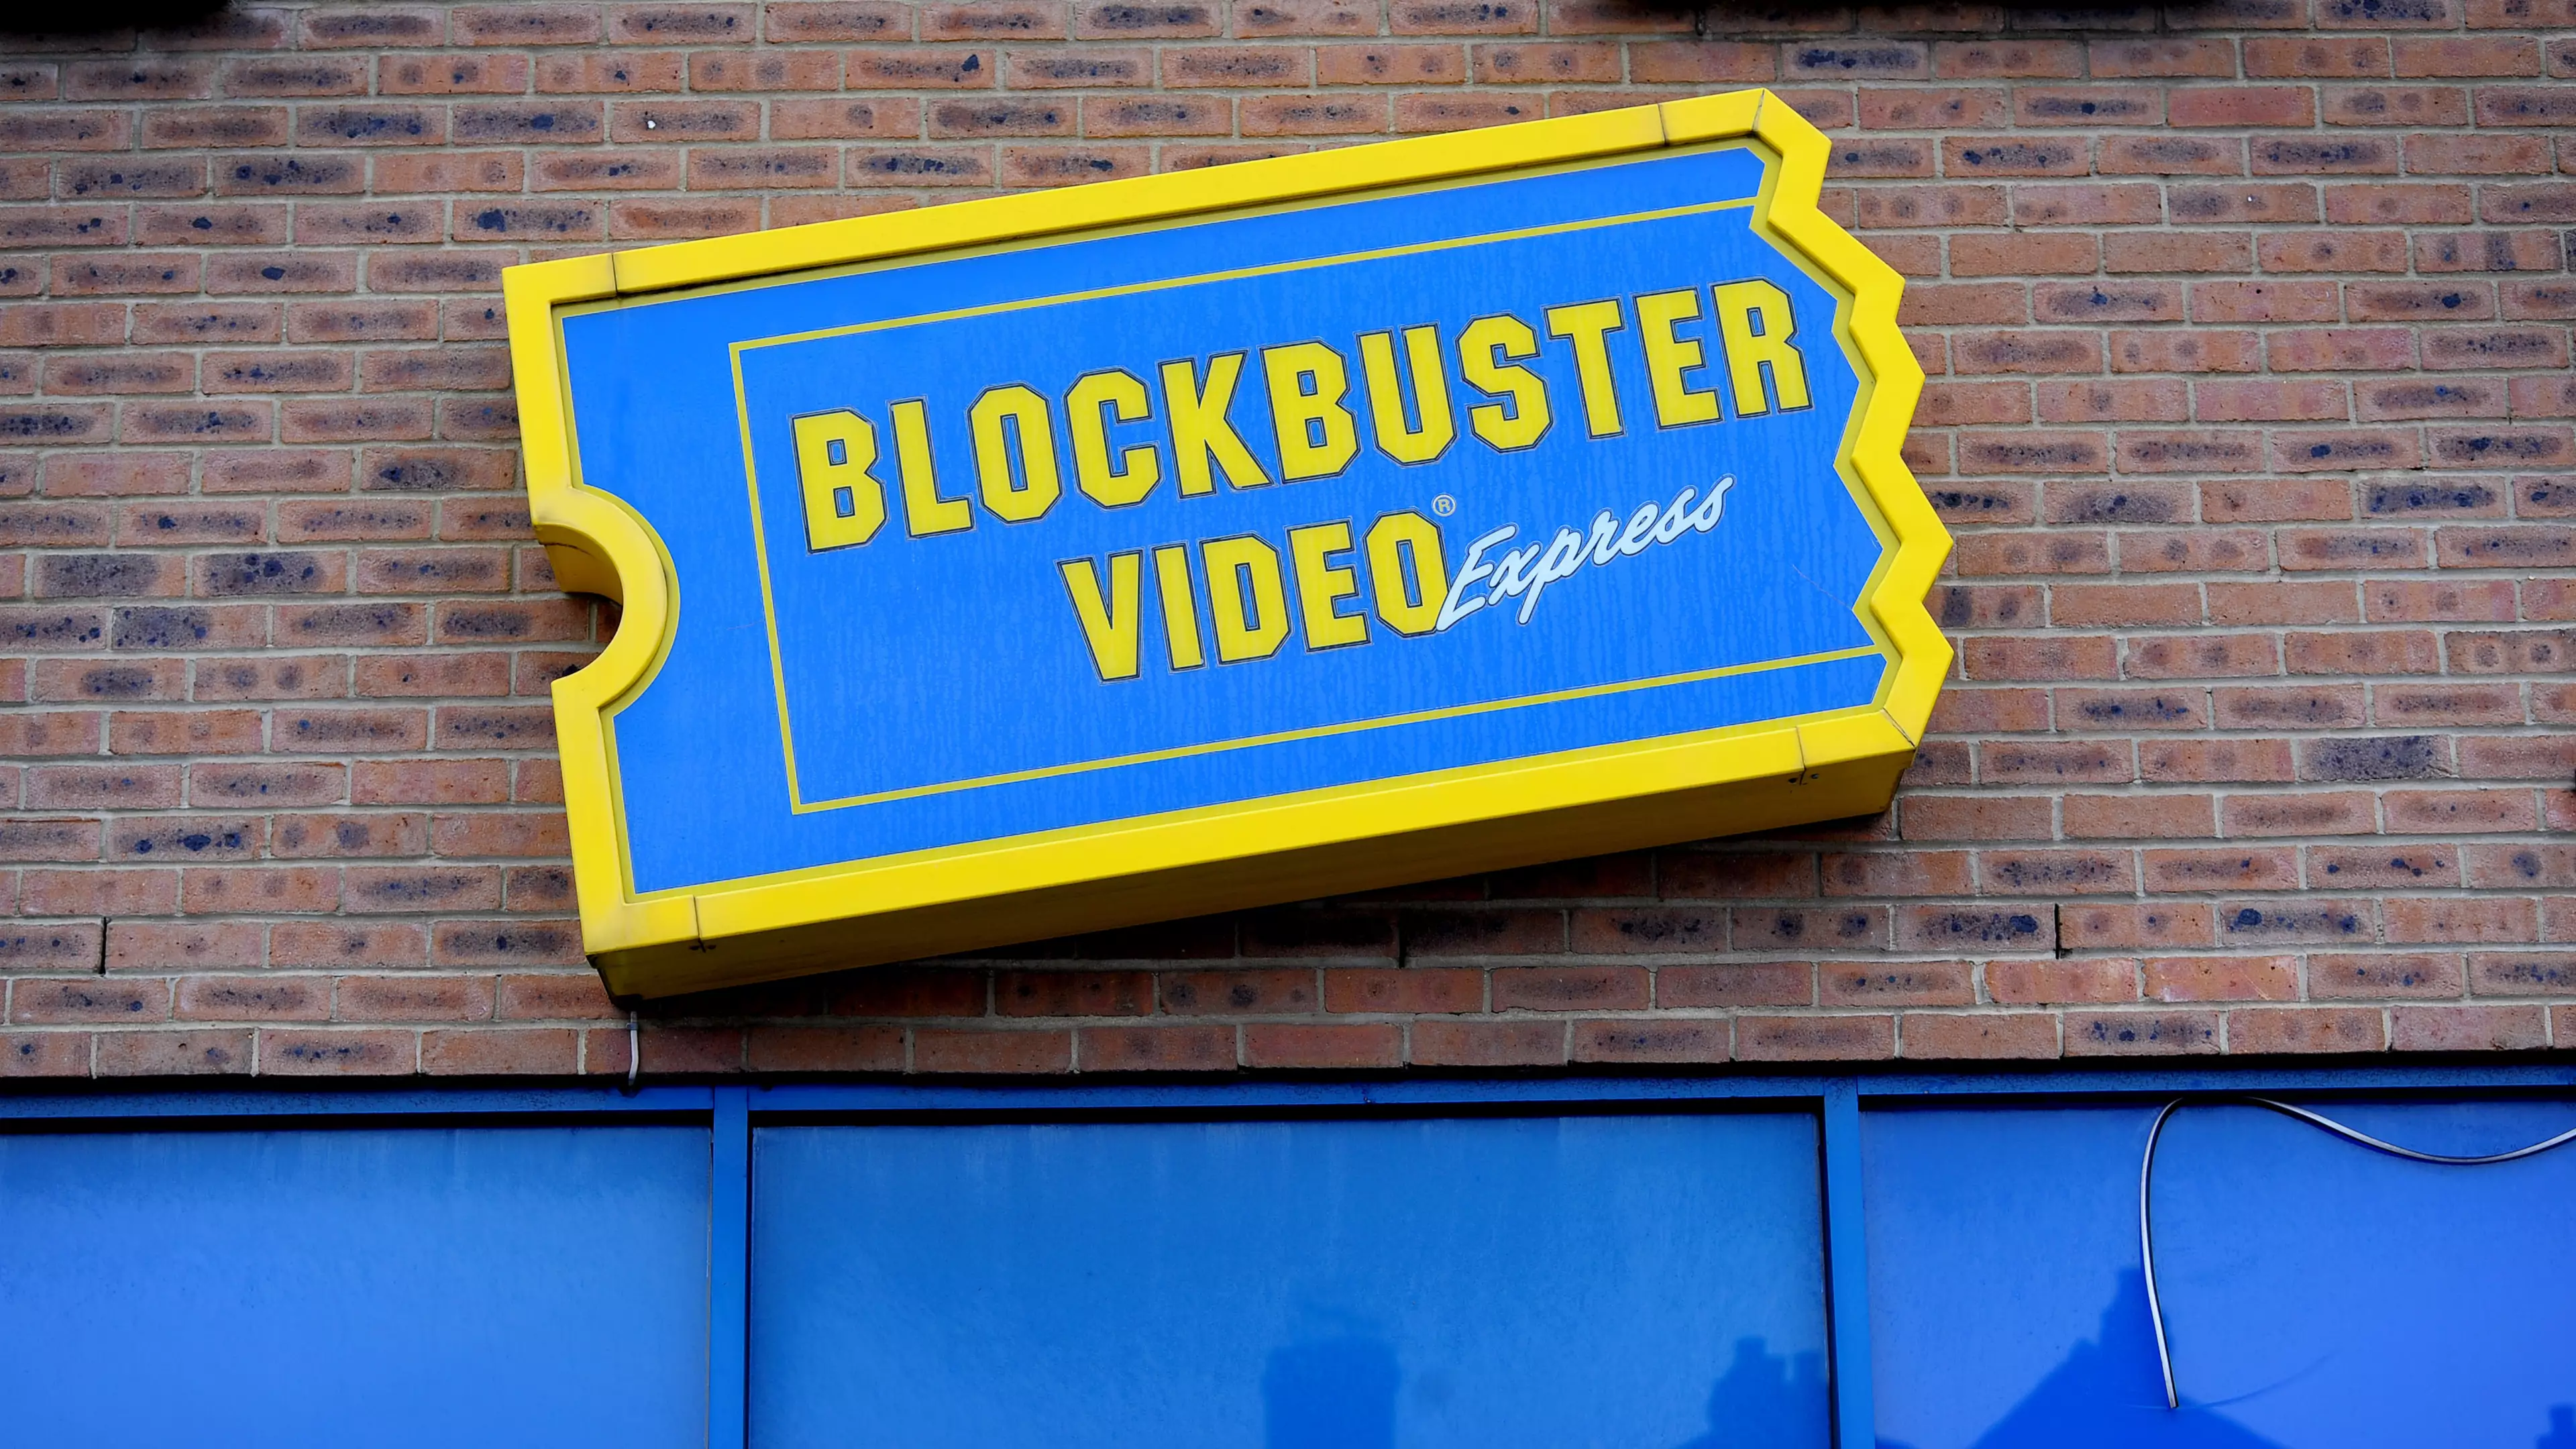 There’s Only One Blockbuster Left In The Whole World After Australian Store Closes 